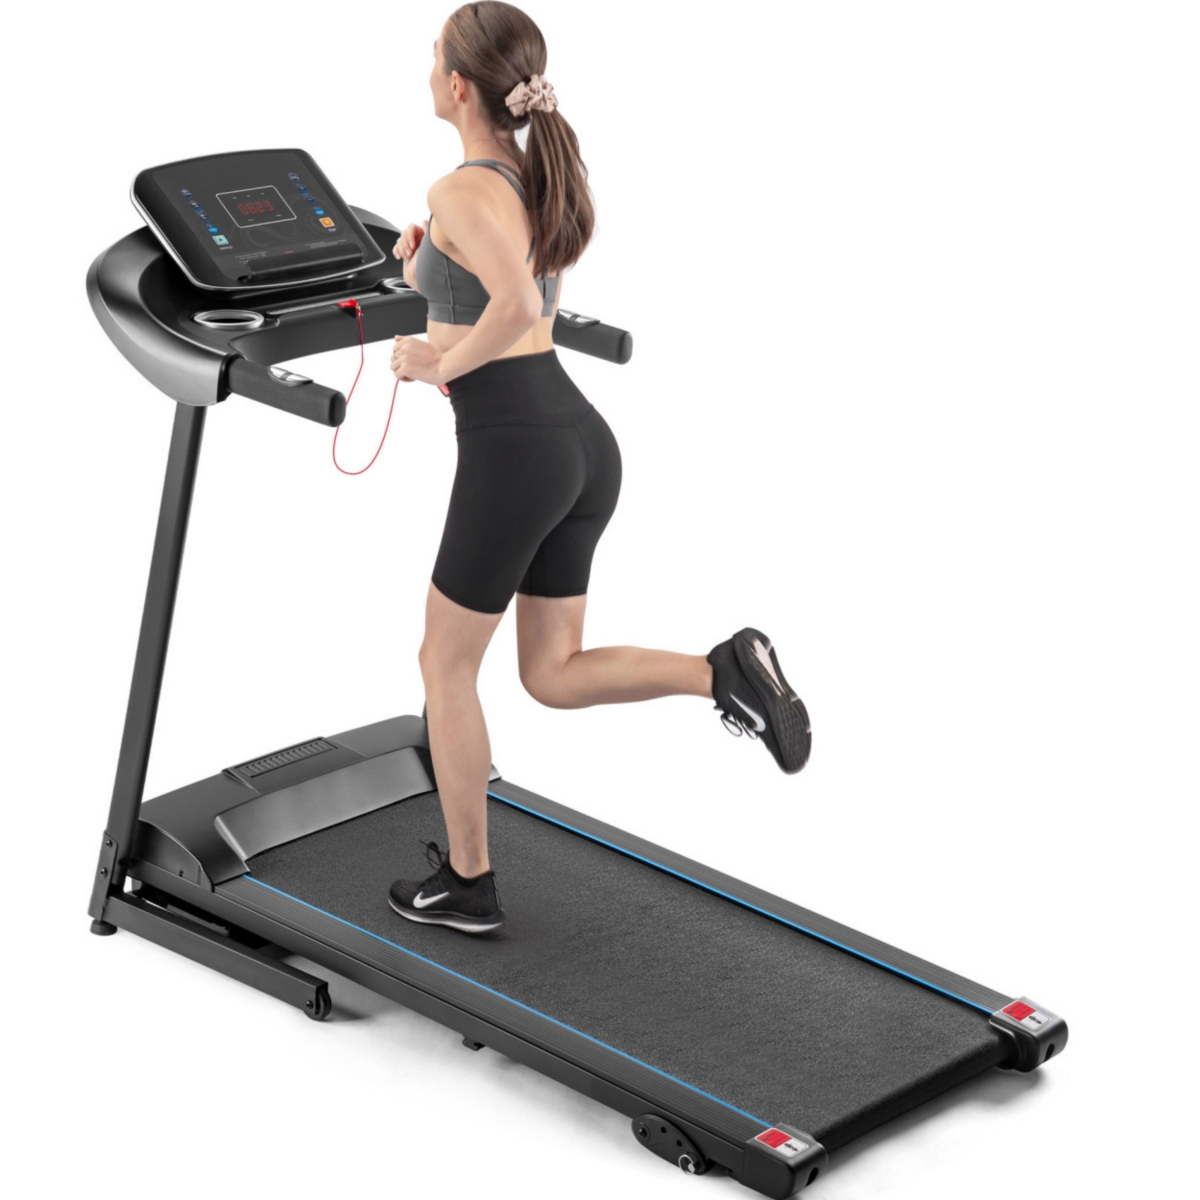 Electric Motorized Treadmill With Audio Speakers, Max. 10 Mph And Incline For Home Gym - Black